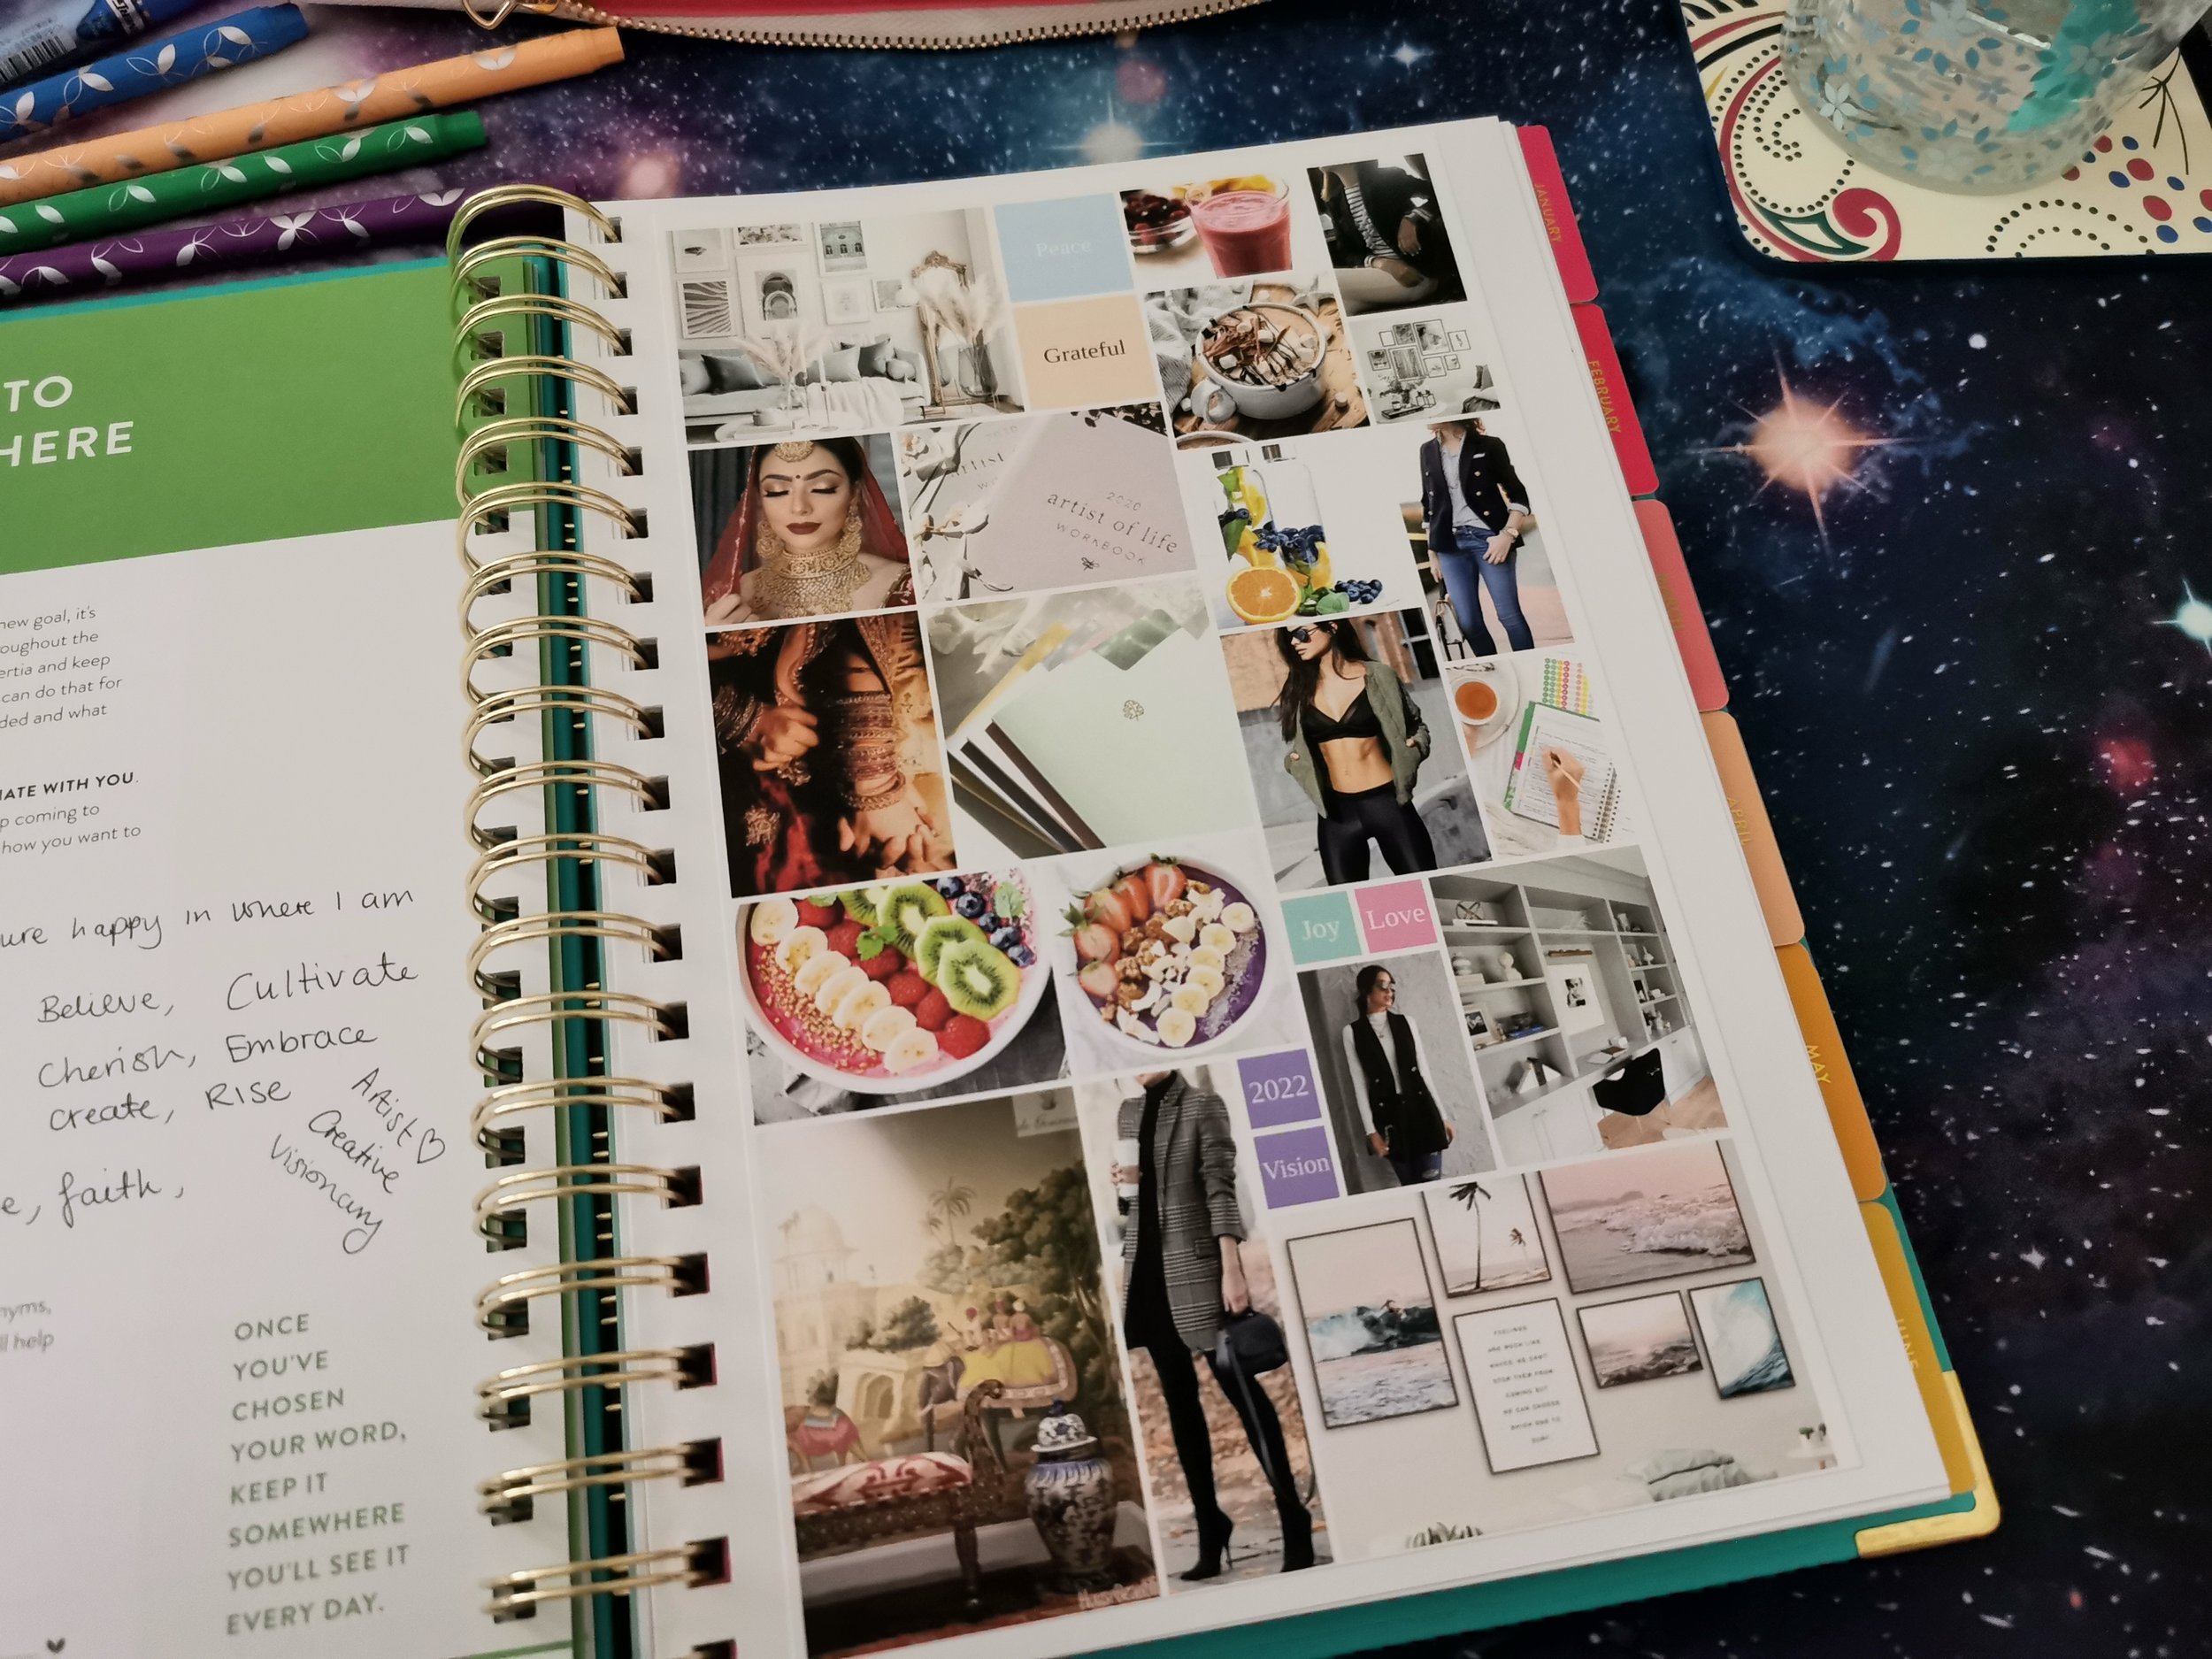 2022 Vision Board Party - Jamieson Diaries